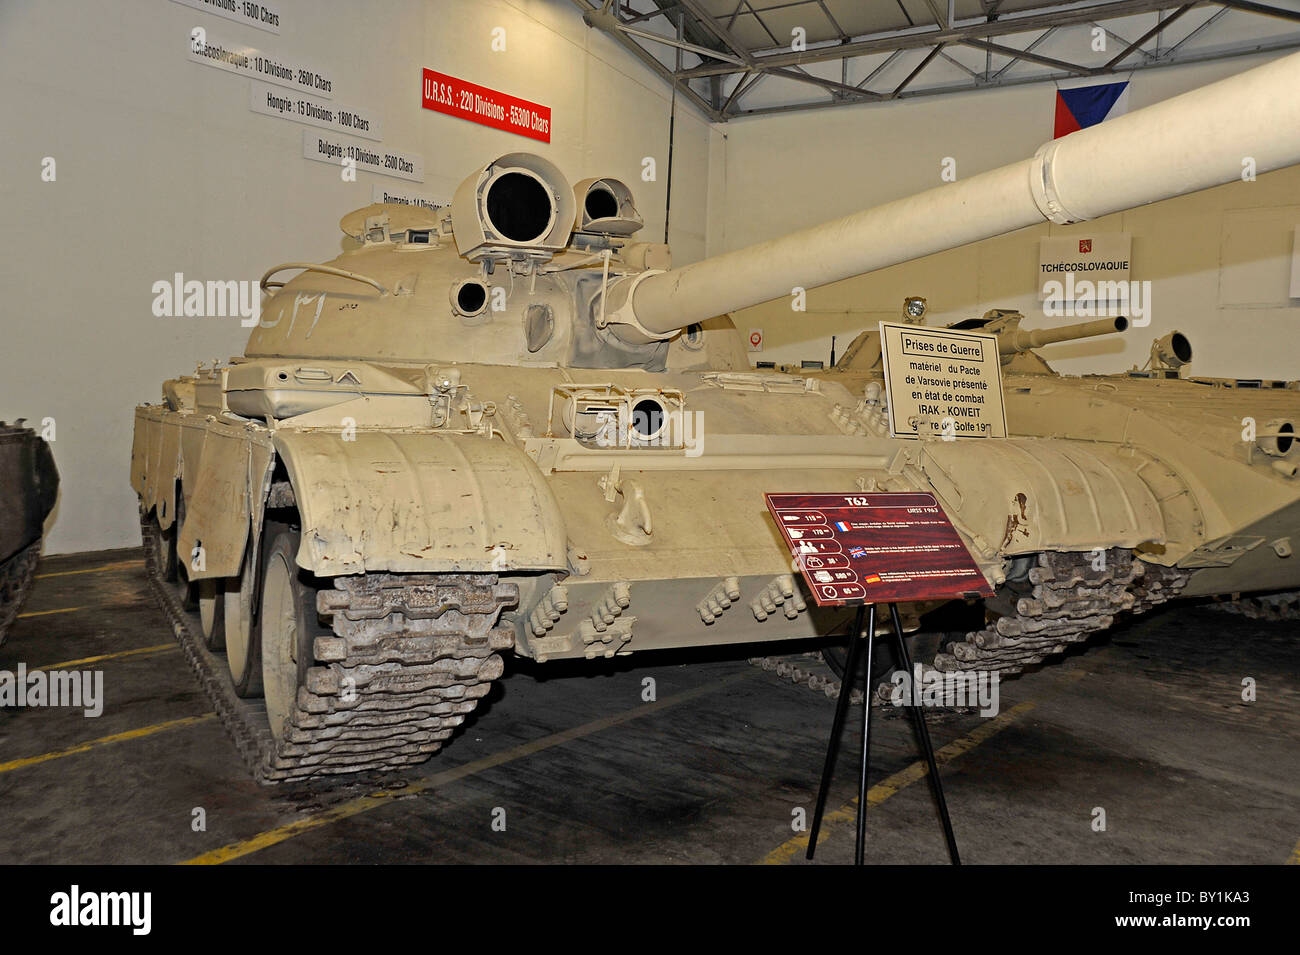 Russian T62 tank on display at Saumur France Stock Photo